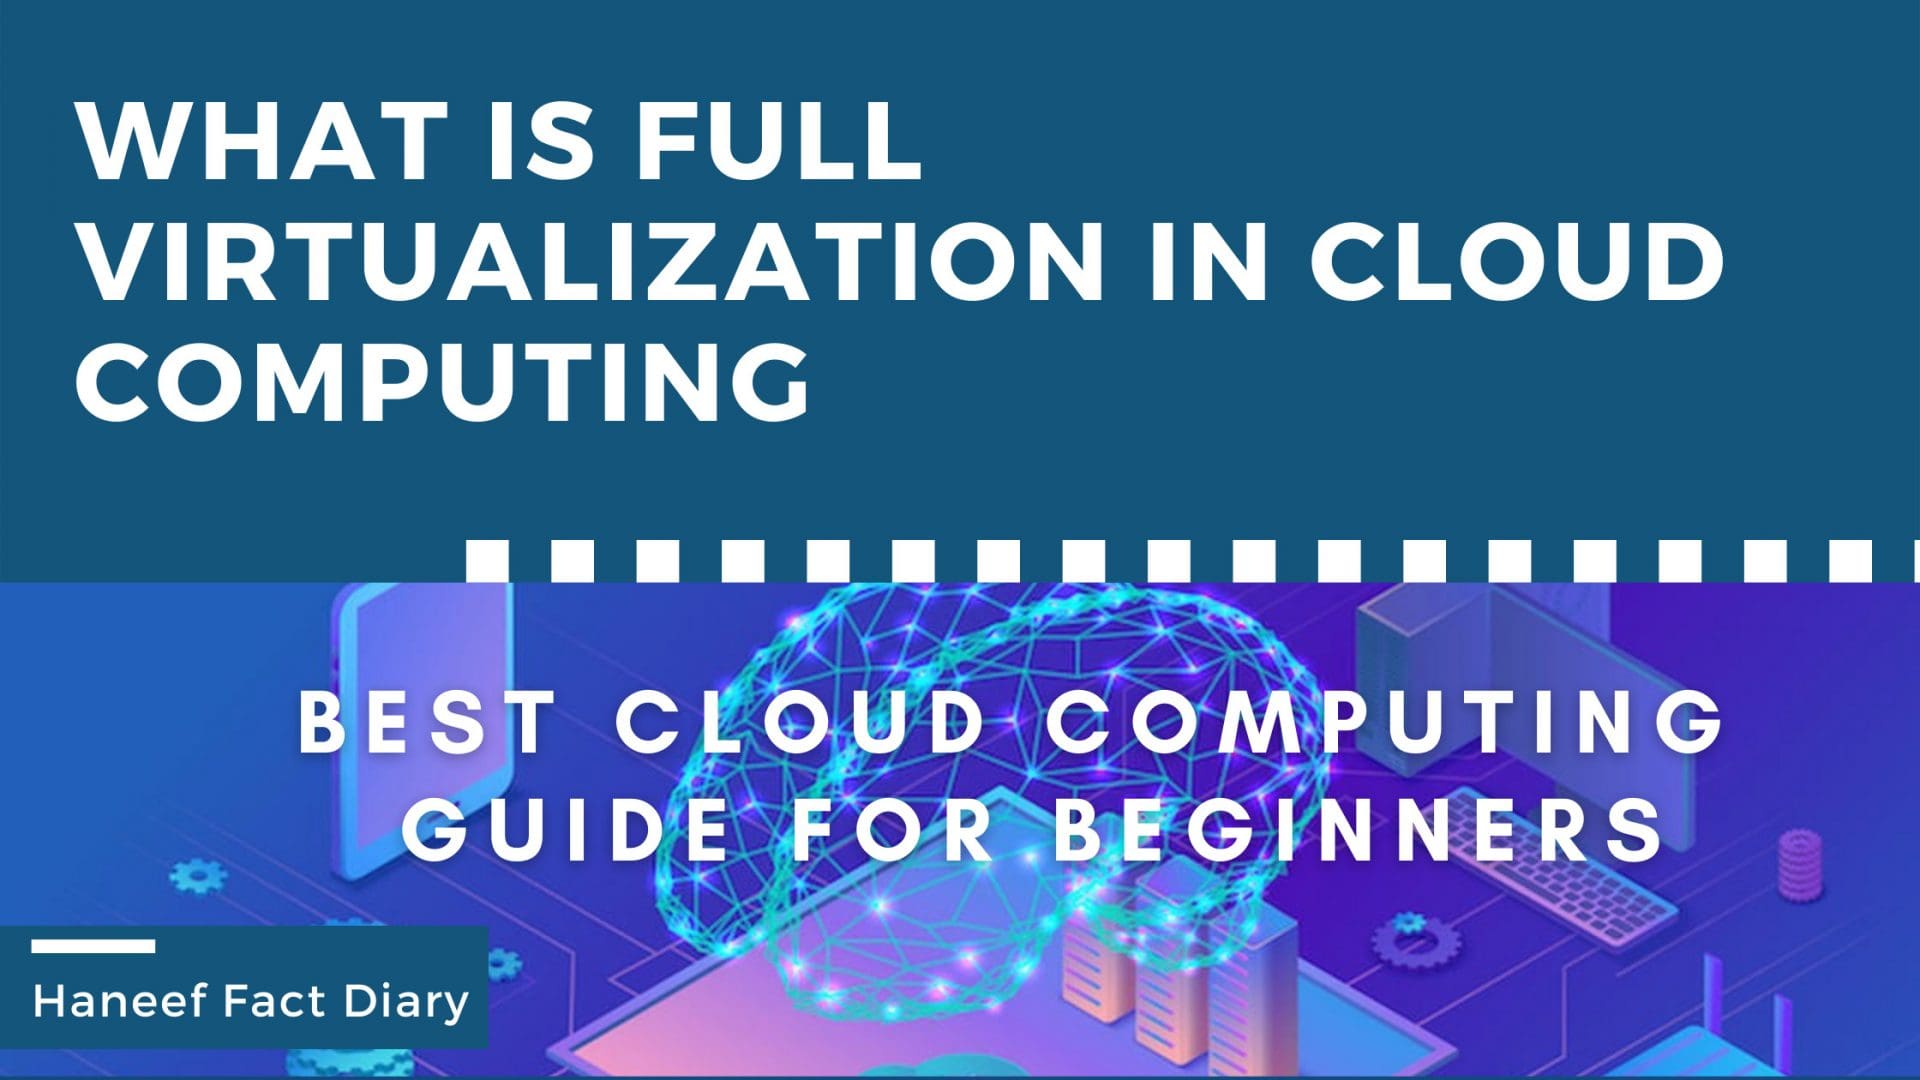 What is full virtualization in cloud computing